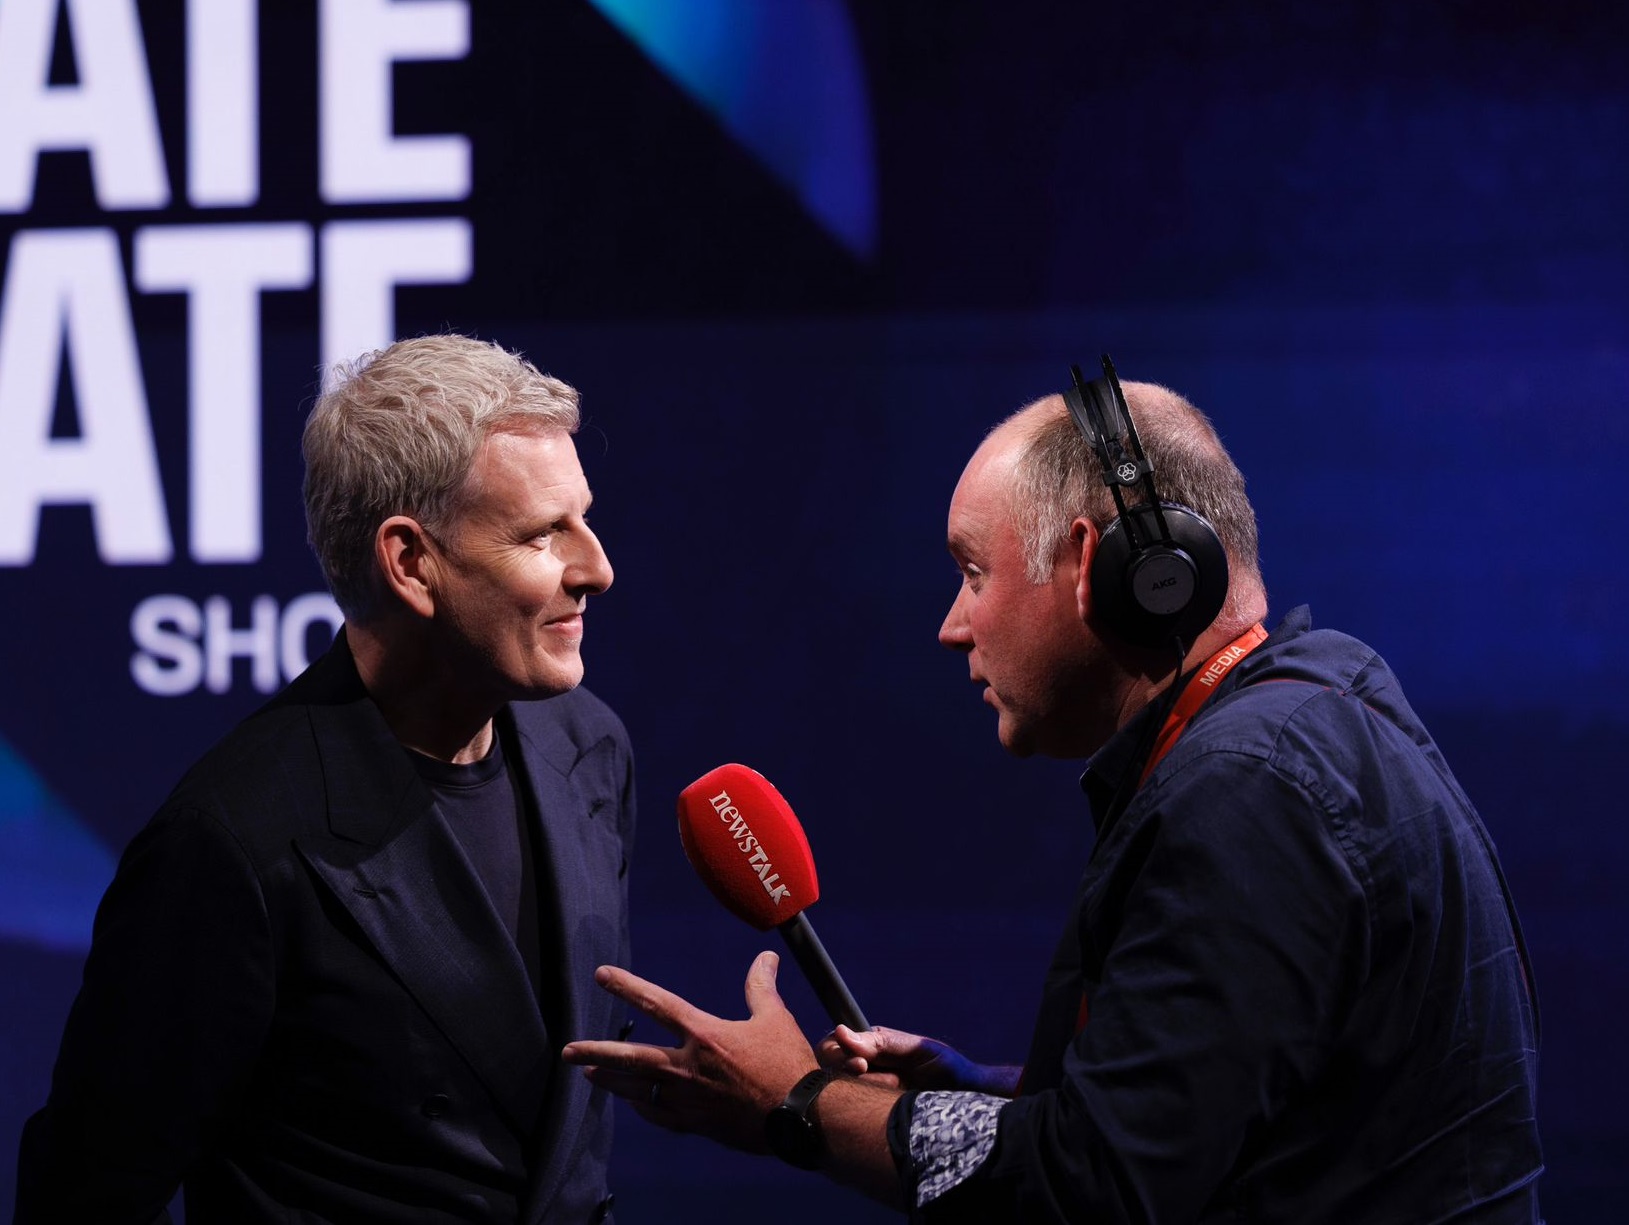 Patrick Kielty talks to Newstalk's Henry McKean on the set of 'The Late Late Show' in RTÉ